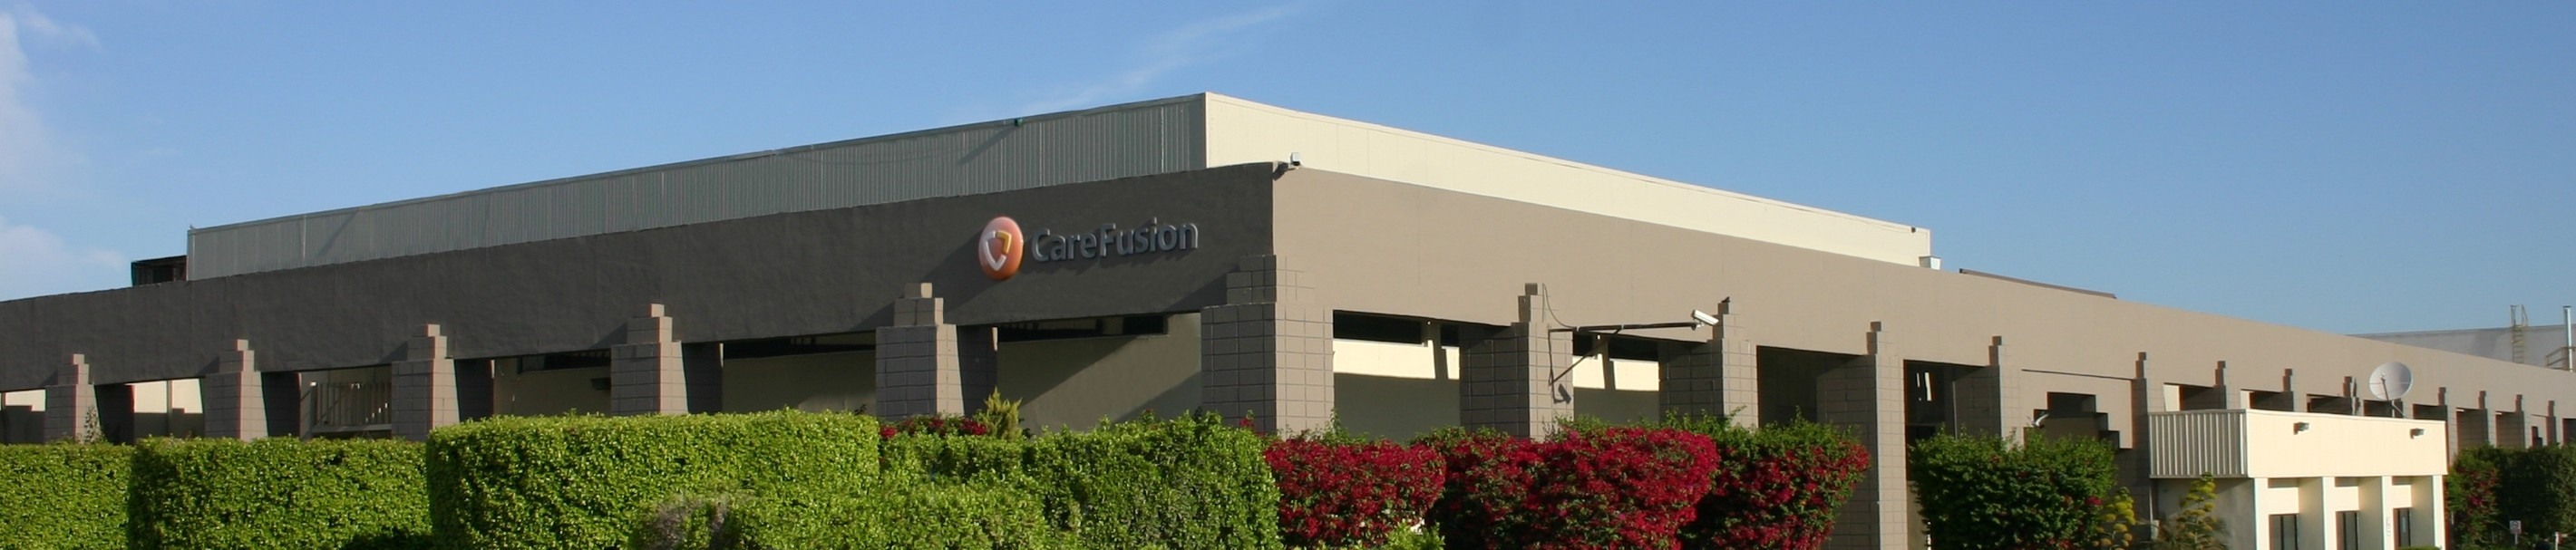 Carefusion Becton Dickinson - PIMSA INDUSTRIAL PARKS IN MEXICO